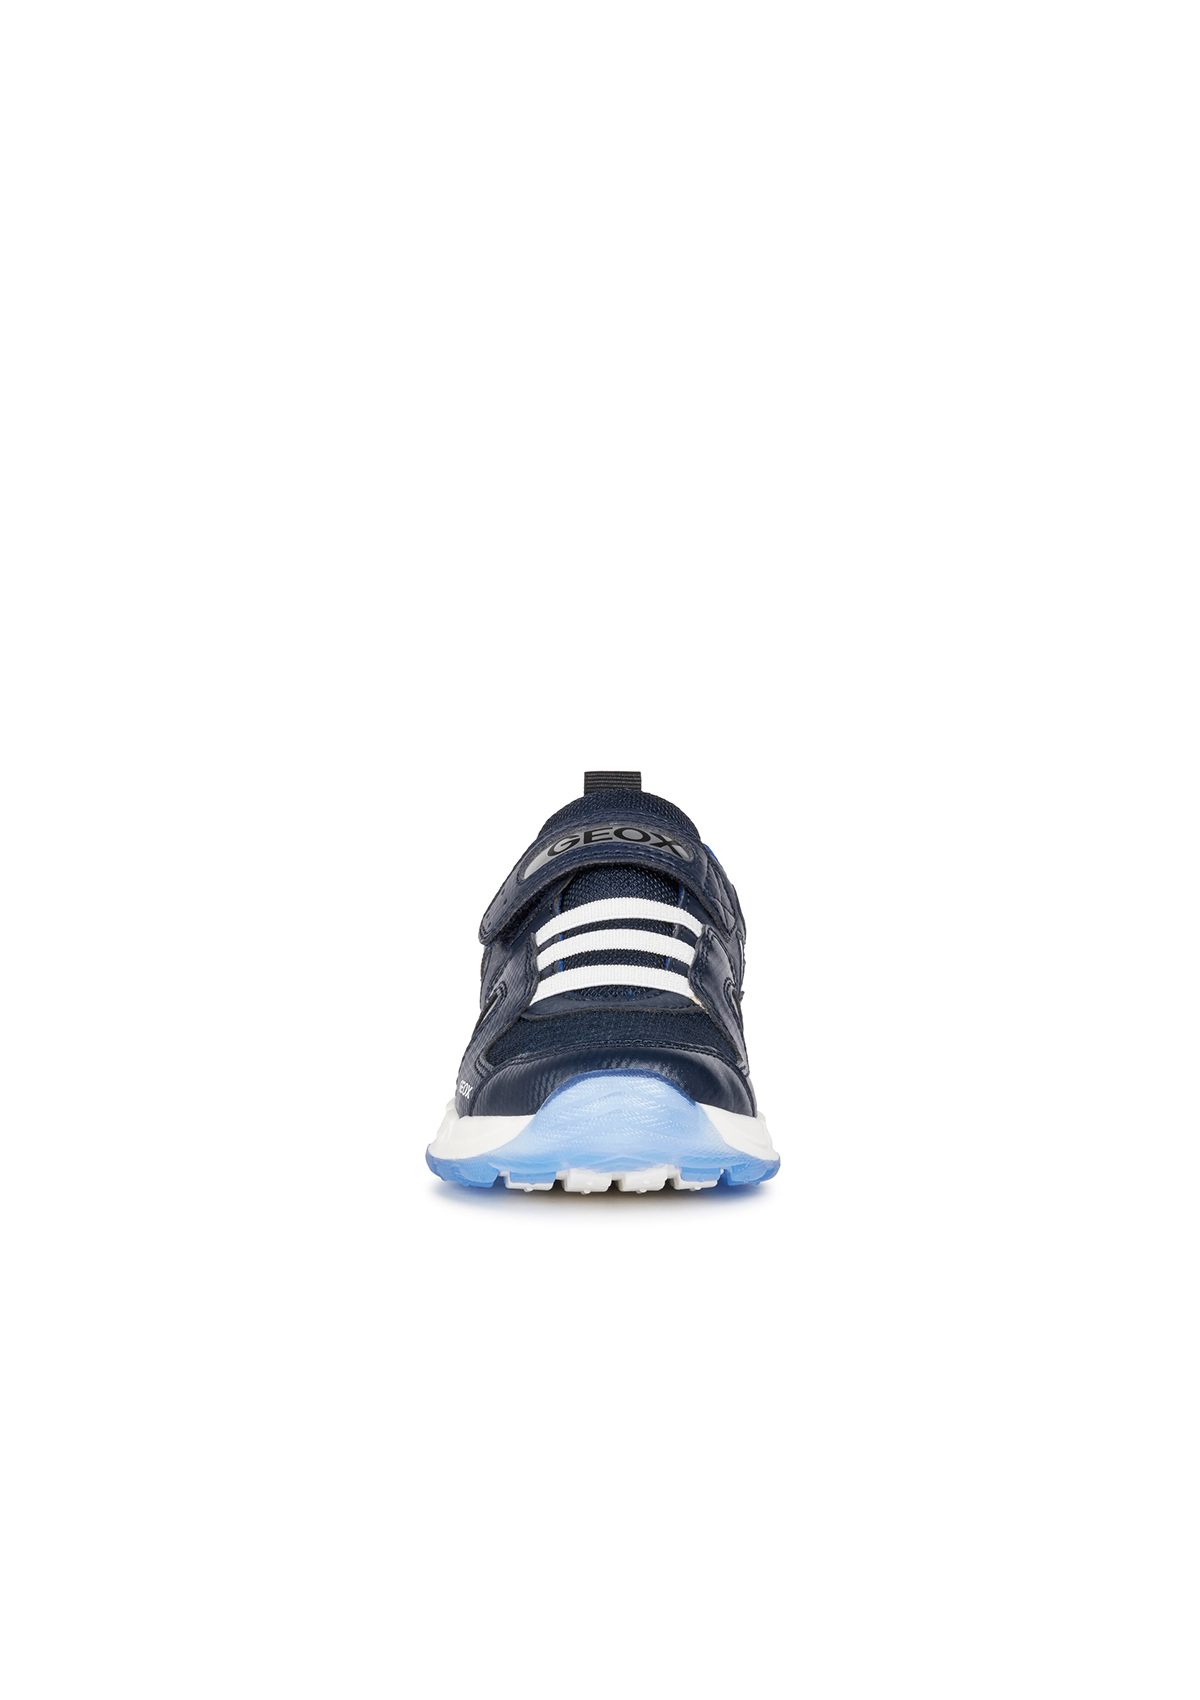 Geox Boys Trainers SPAZIALE Navy Royal